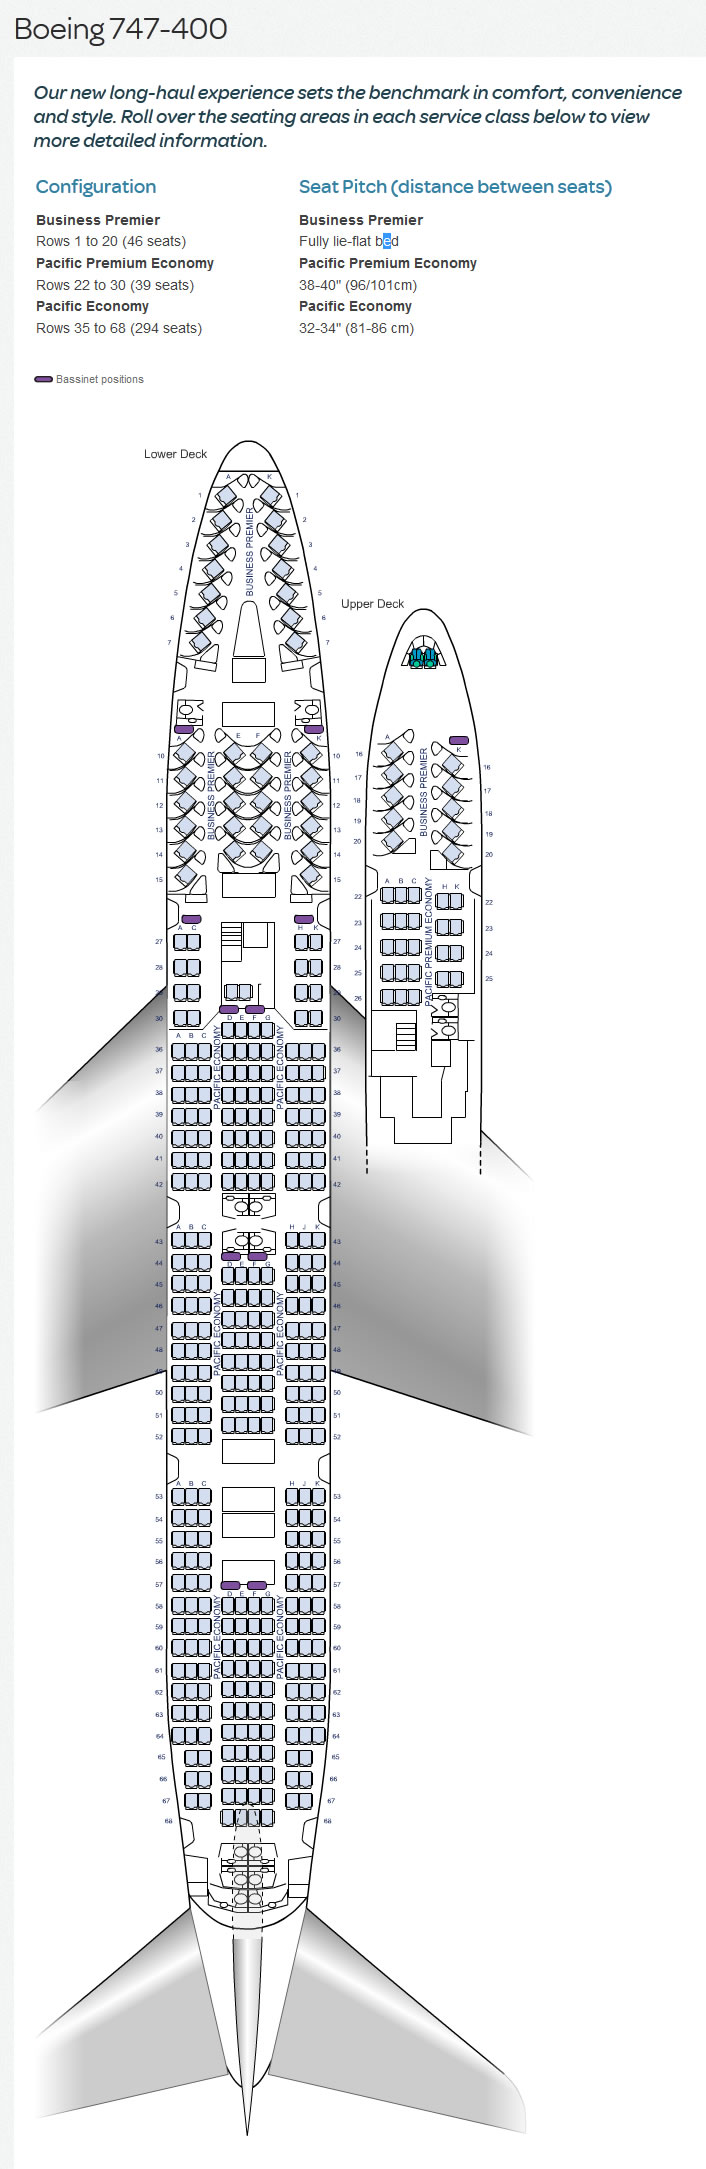 AIR NEW ZEALAND AIRLINES BOEING 747-400 AIRCRAFT SEATING CHART